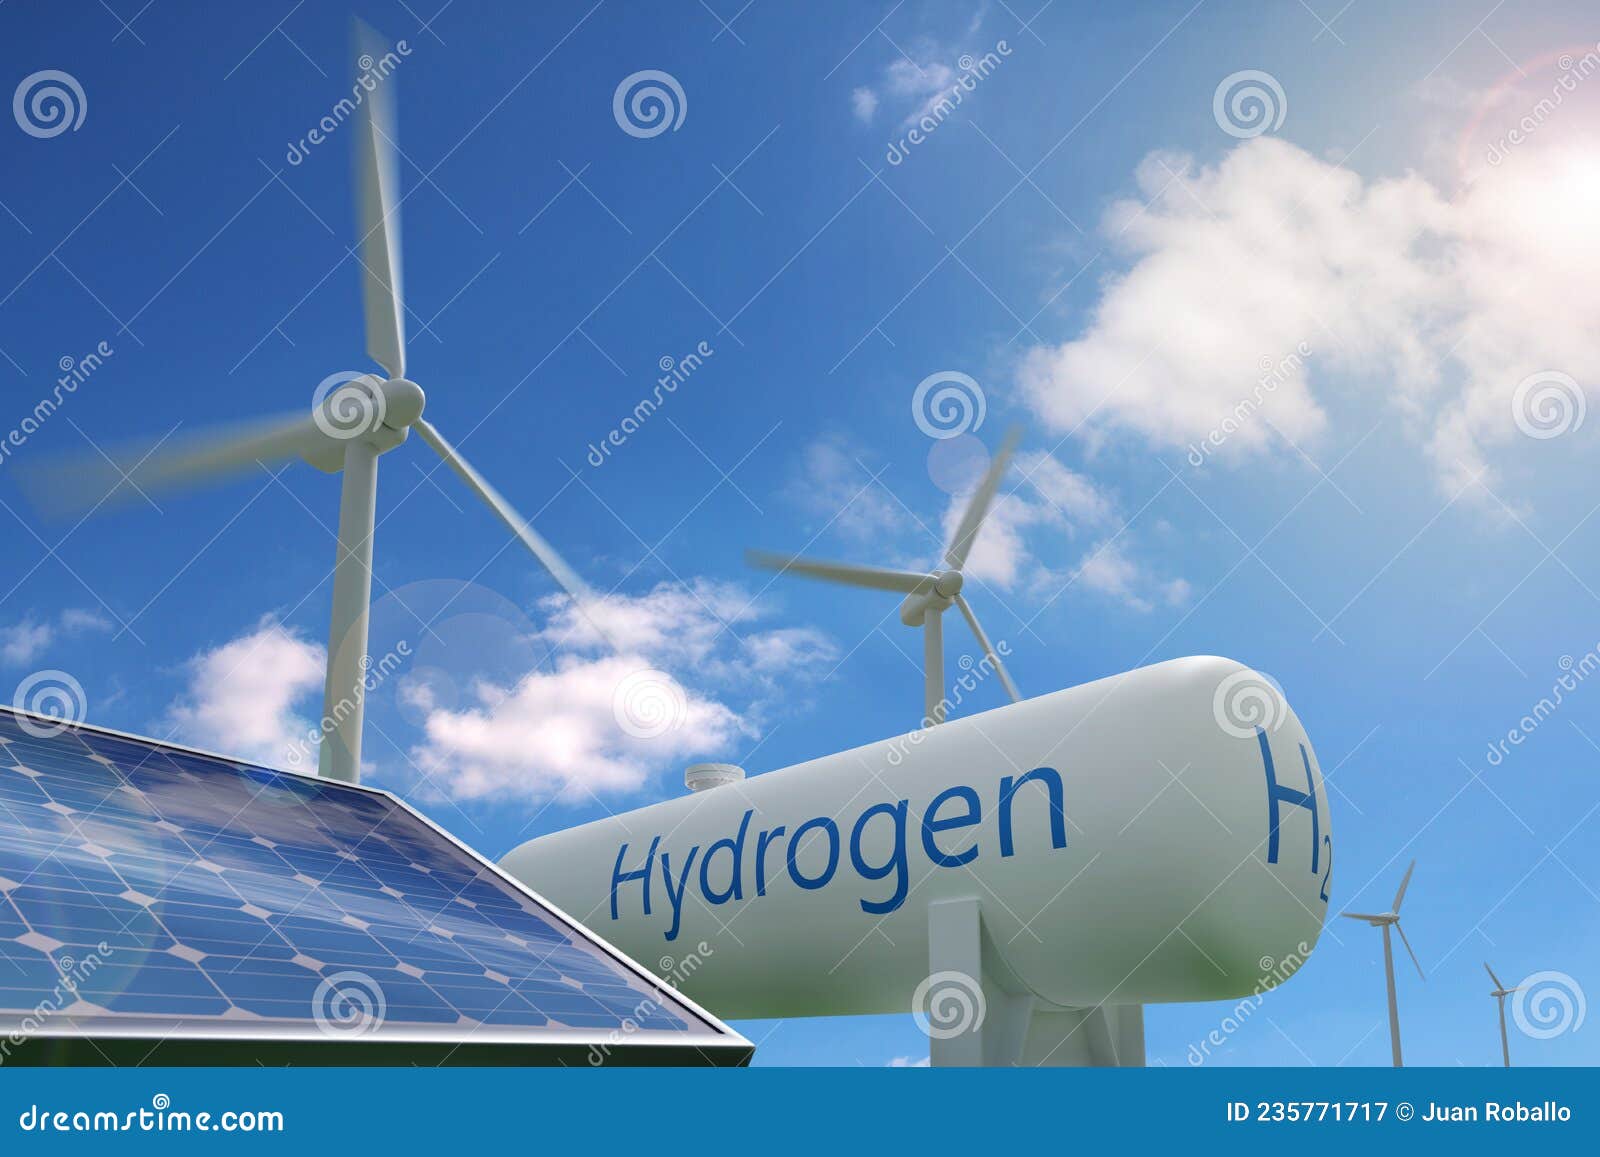 hydrogen tank, solar panel and windmills on blue sky background. sustainable and ecological energy concept. 3d 